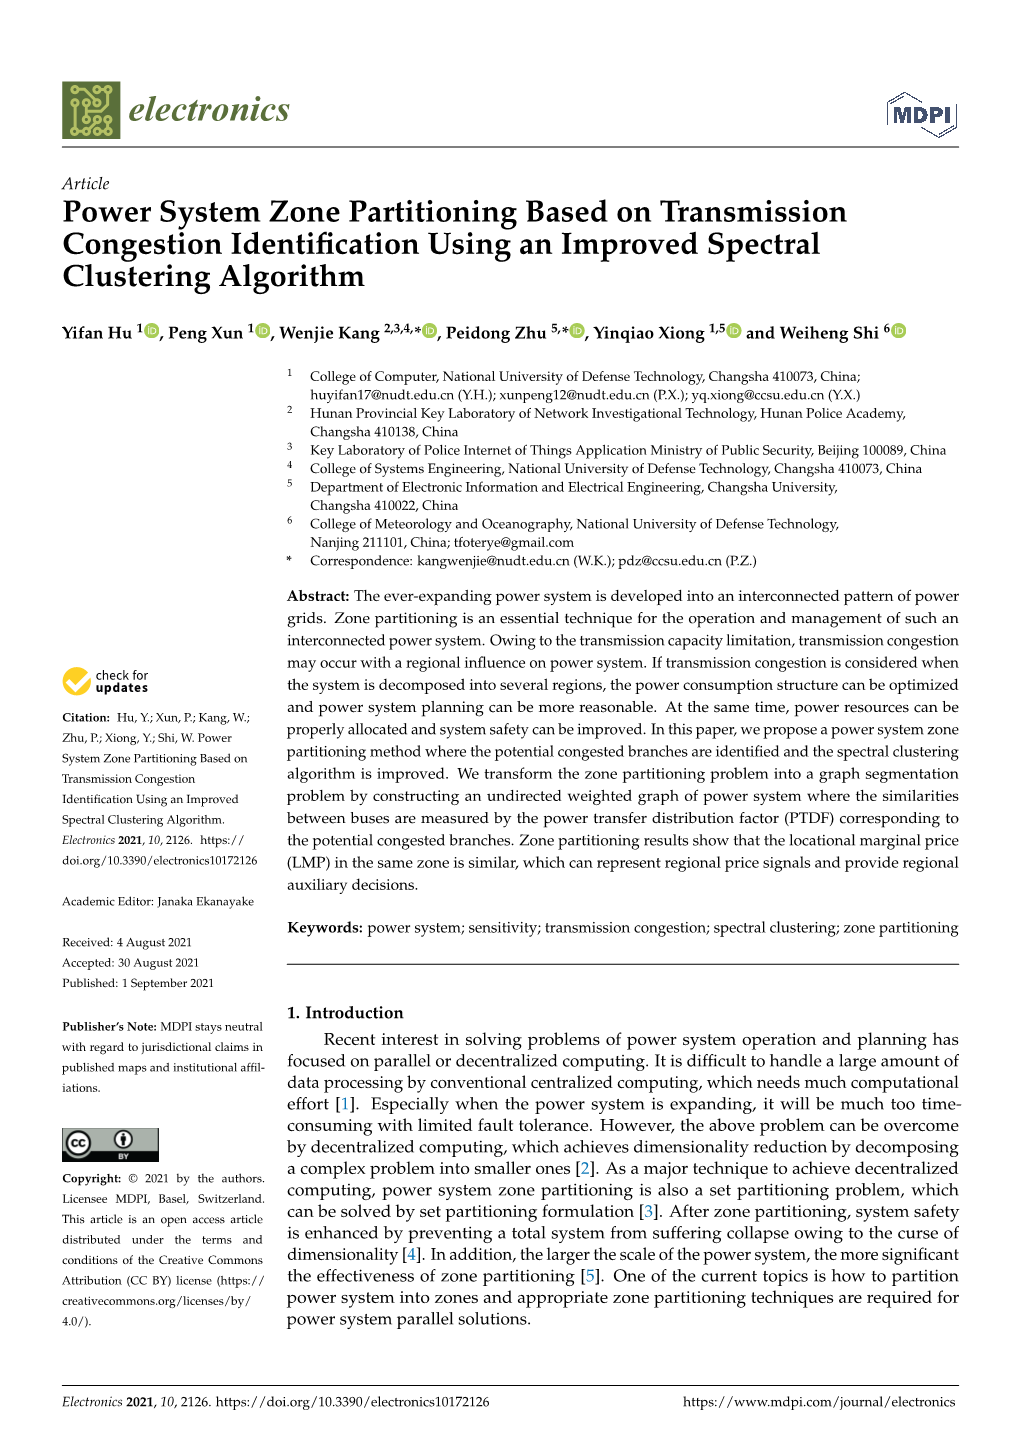 Power System Zone Partitioning Based on Transmission Congestion Identiﬁcation Using an Improved Spectral Clustering Algorithm